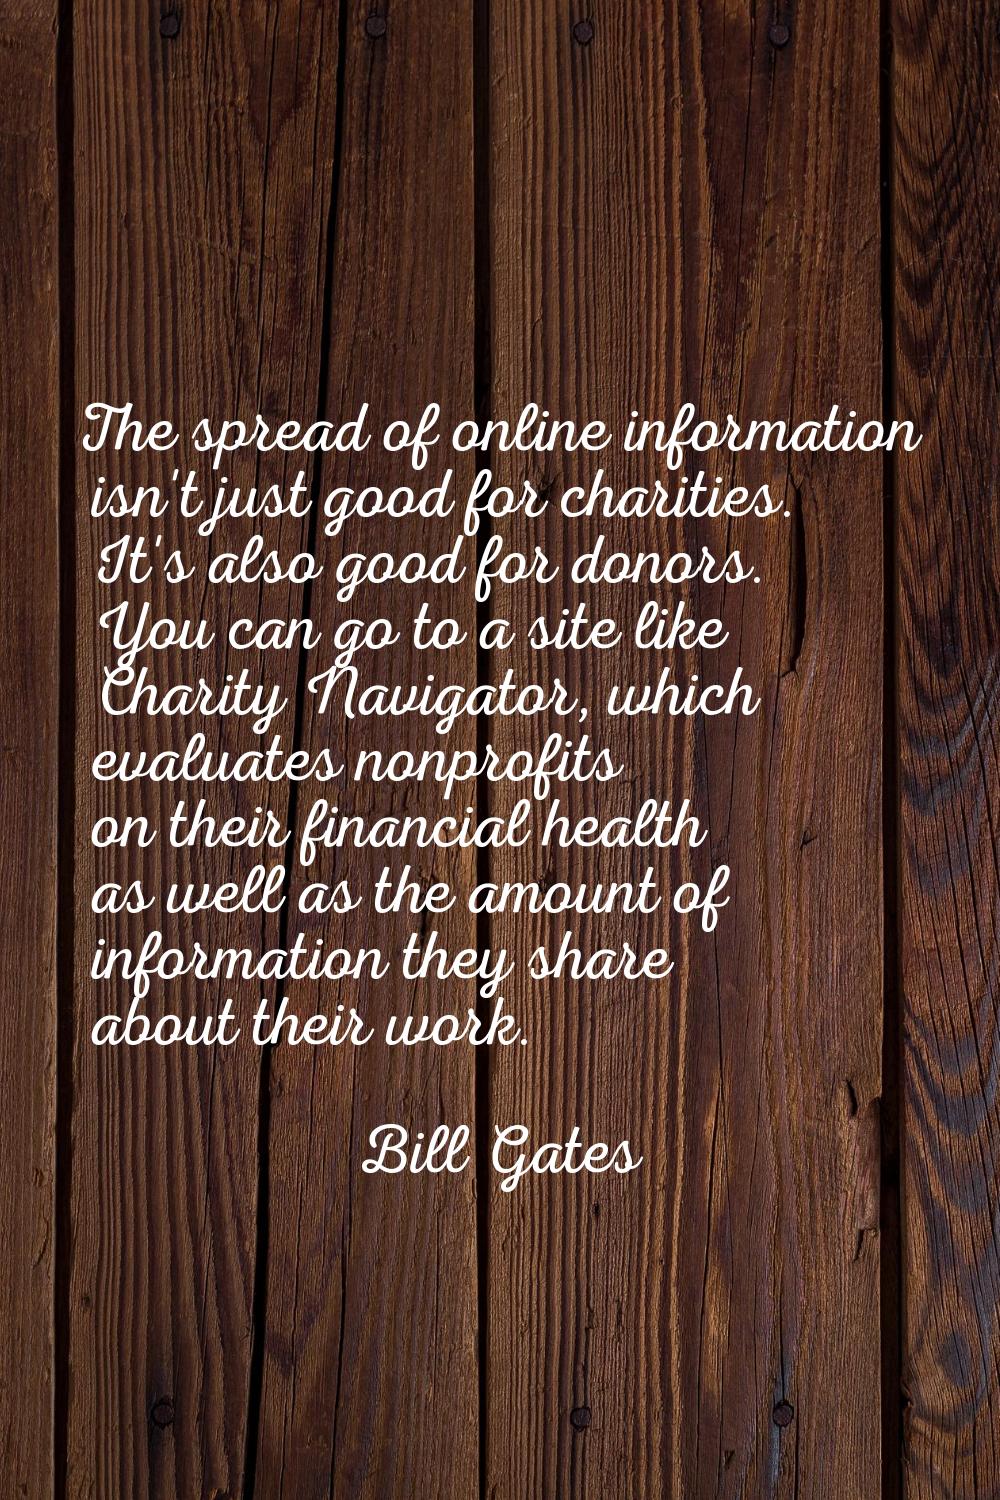 The spread of online information isn't just good for charities. It's also good for donors. You can 